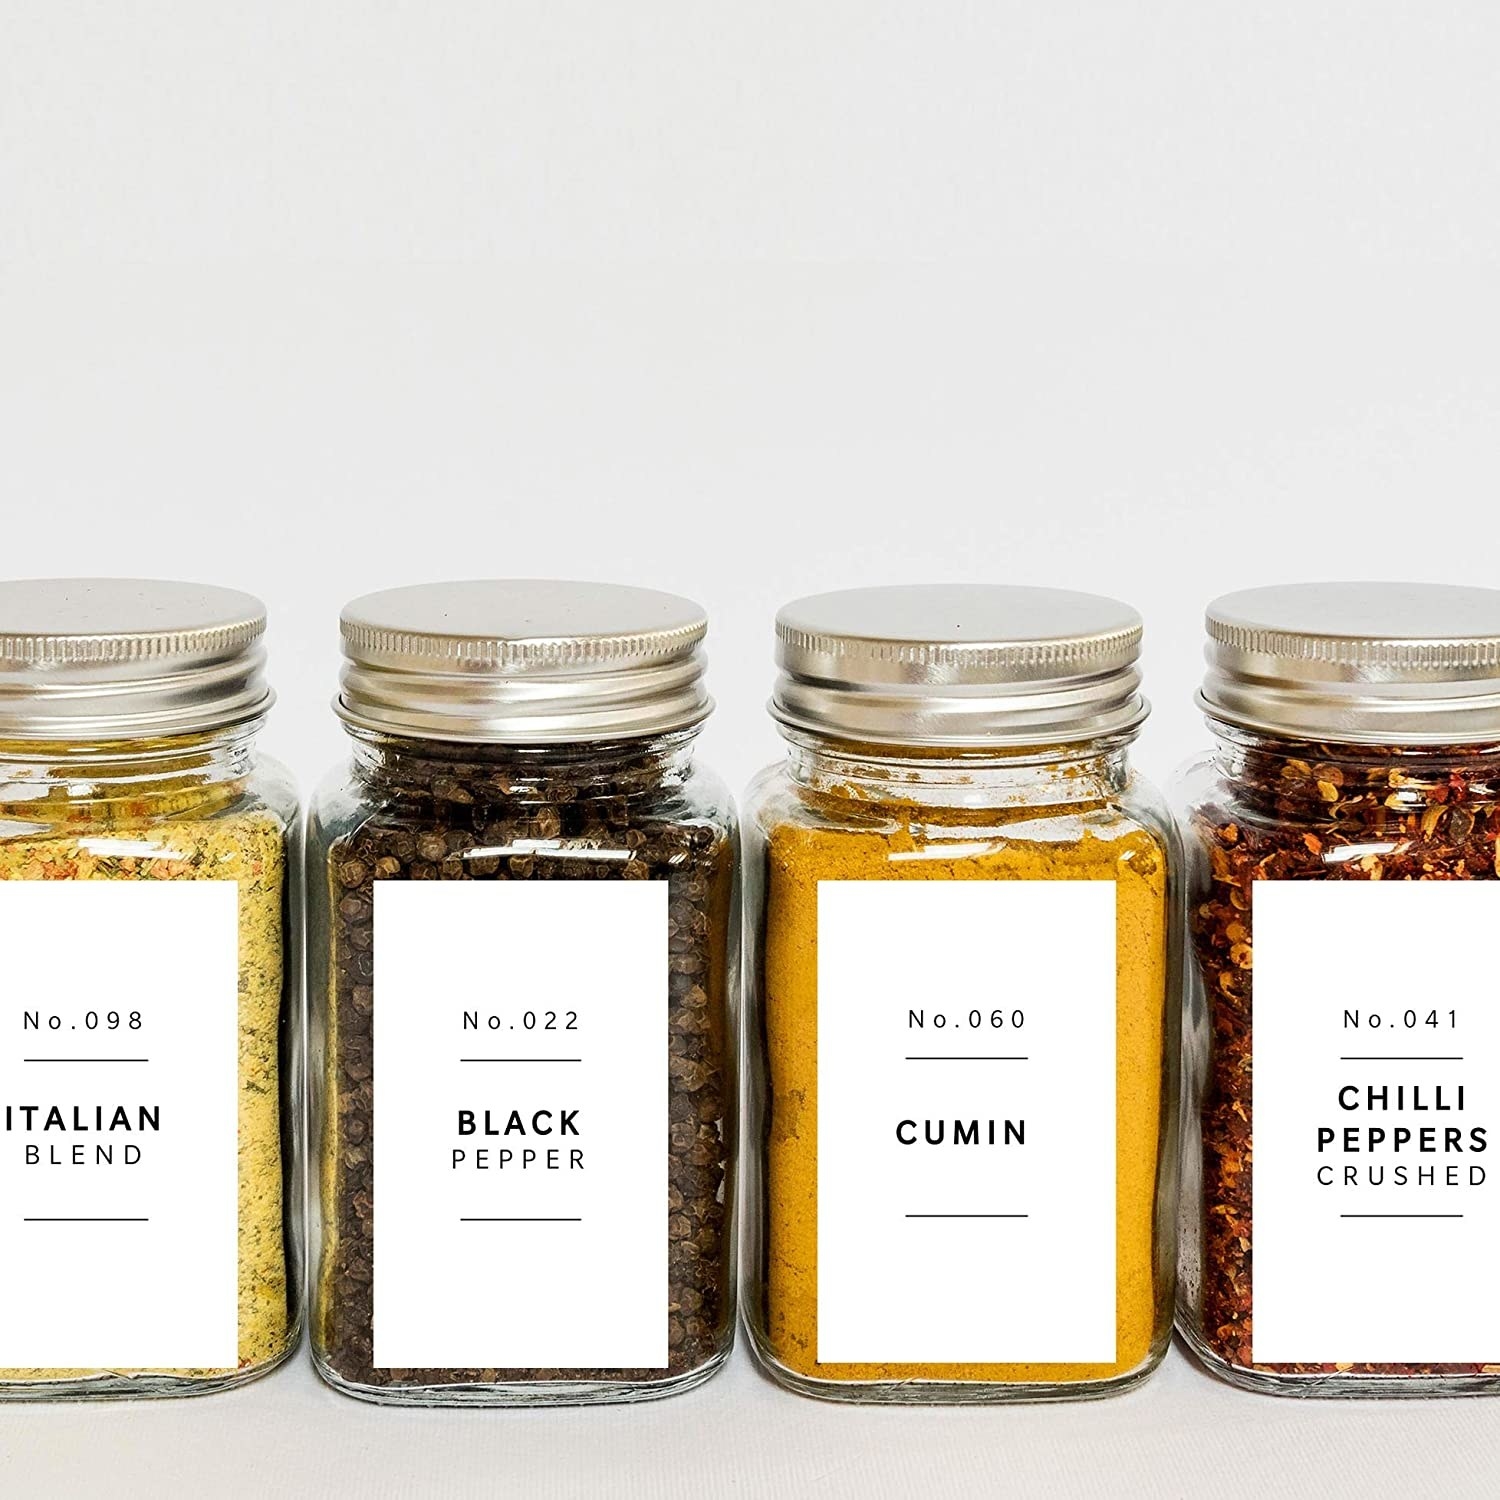 spice jars with labels on each one